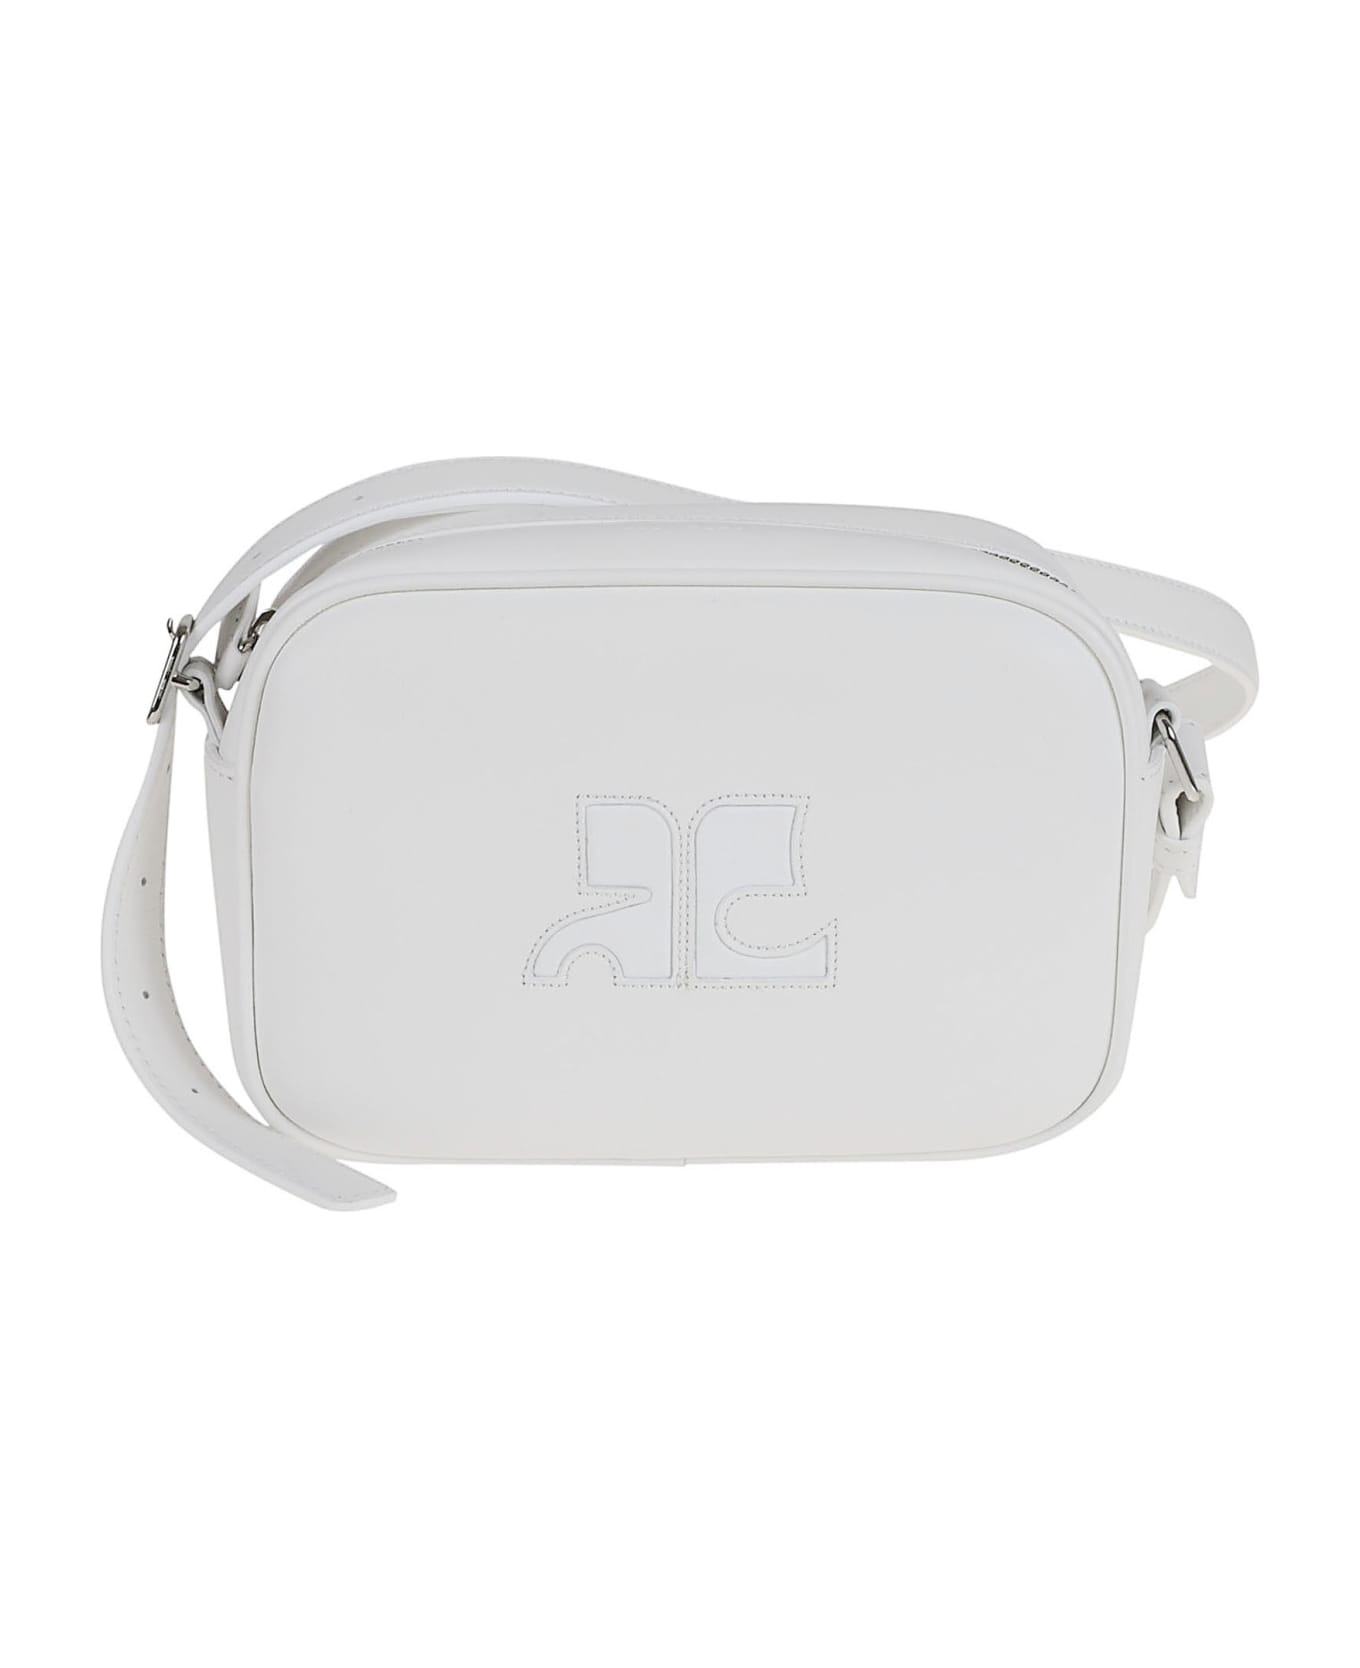 Courrèges Reedition Camera Bag - Heritage White